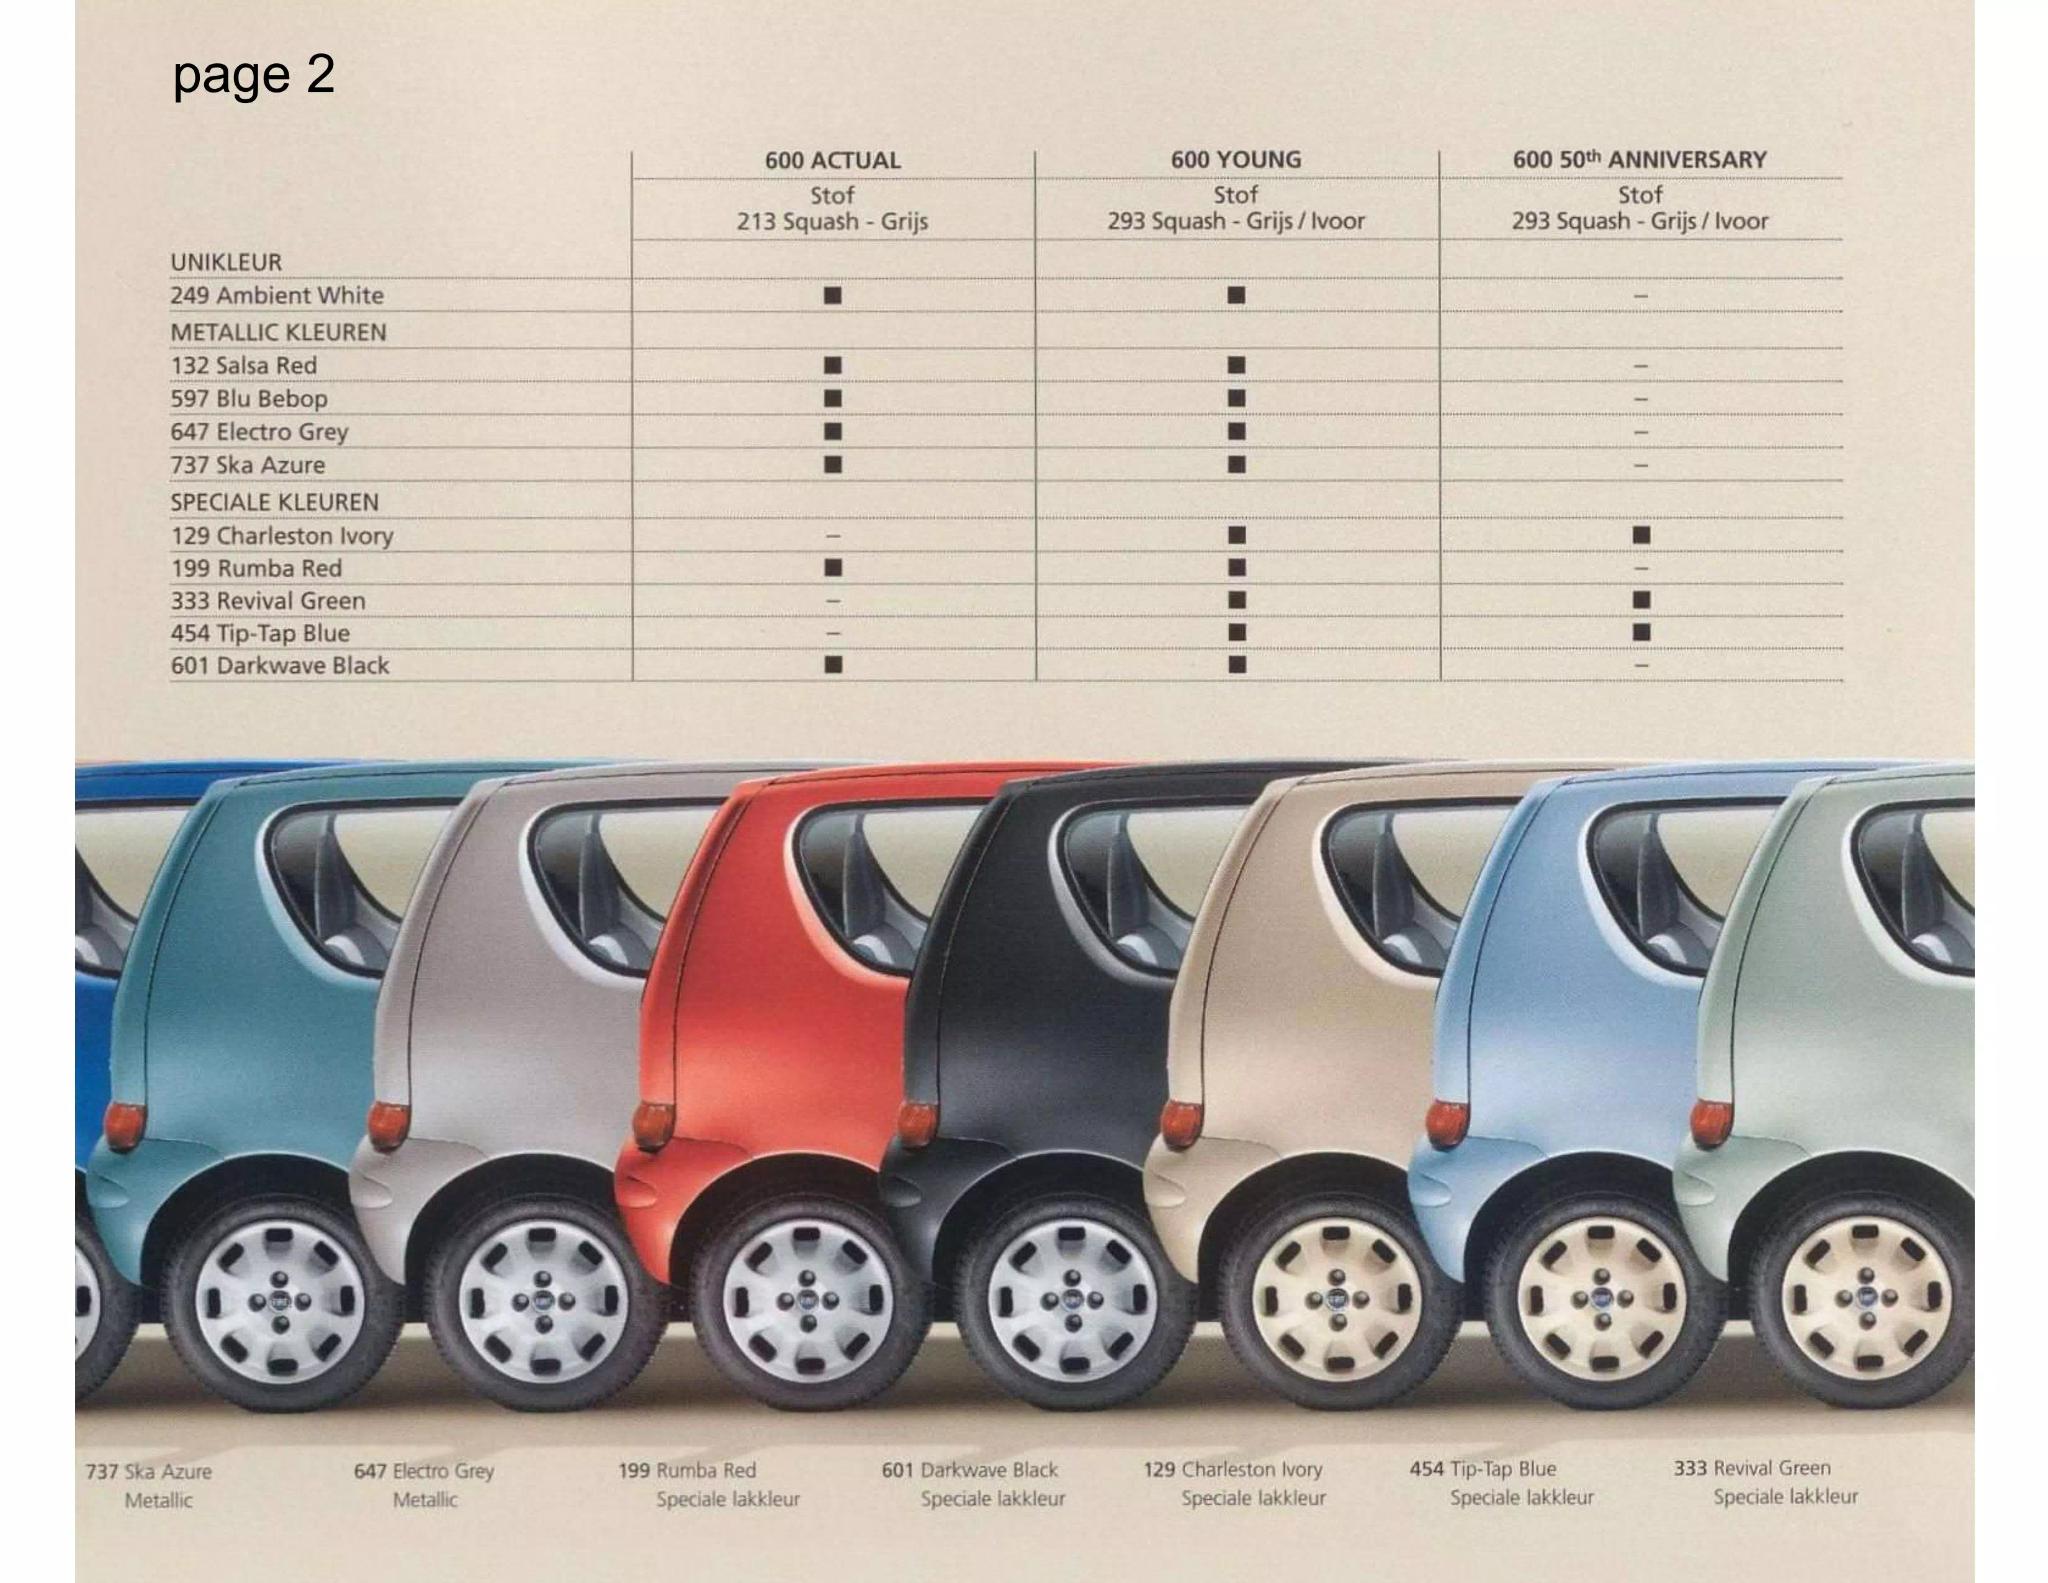 Vehicle Examples and color the 2006 Fiat model 600 came in.